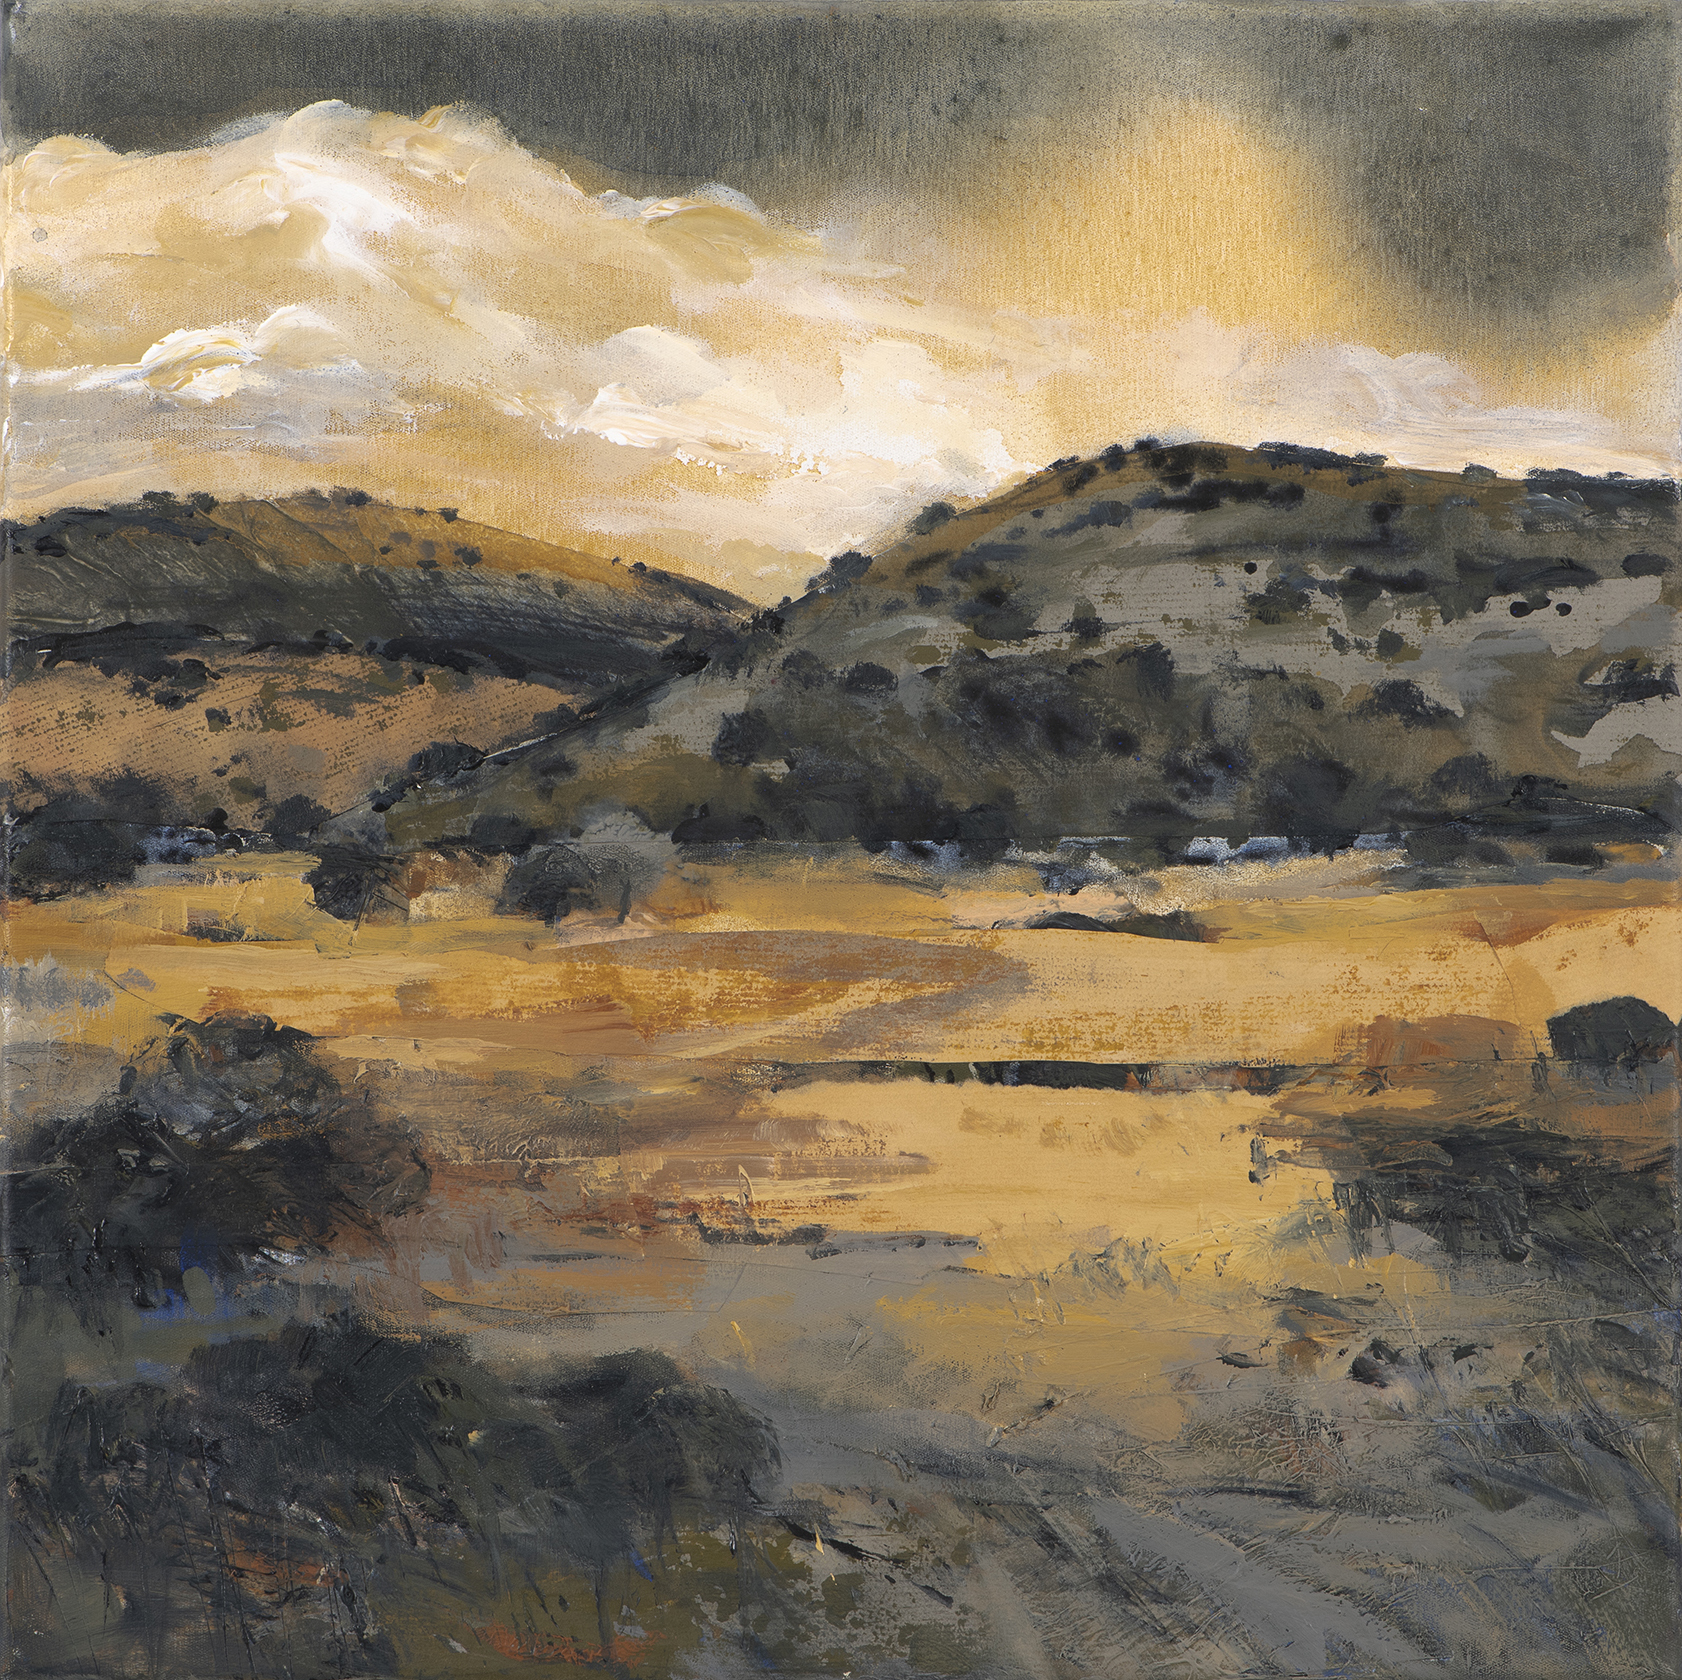 Judith White 'Western Plains (Study) 3' acrylic and collage on canvas 40 x 40cm $2,900